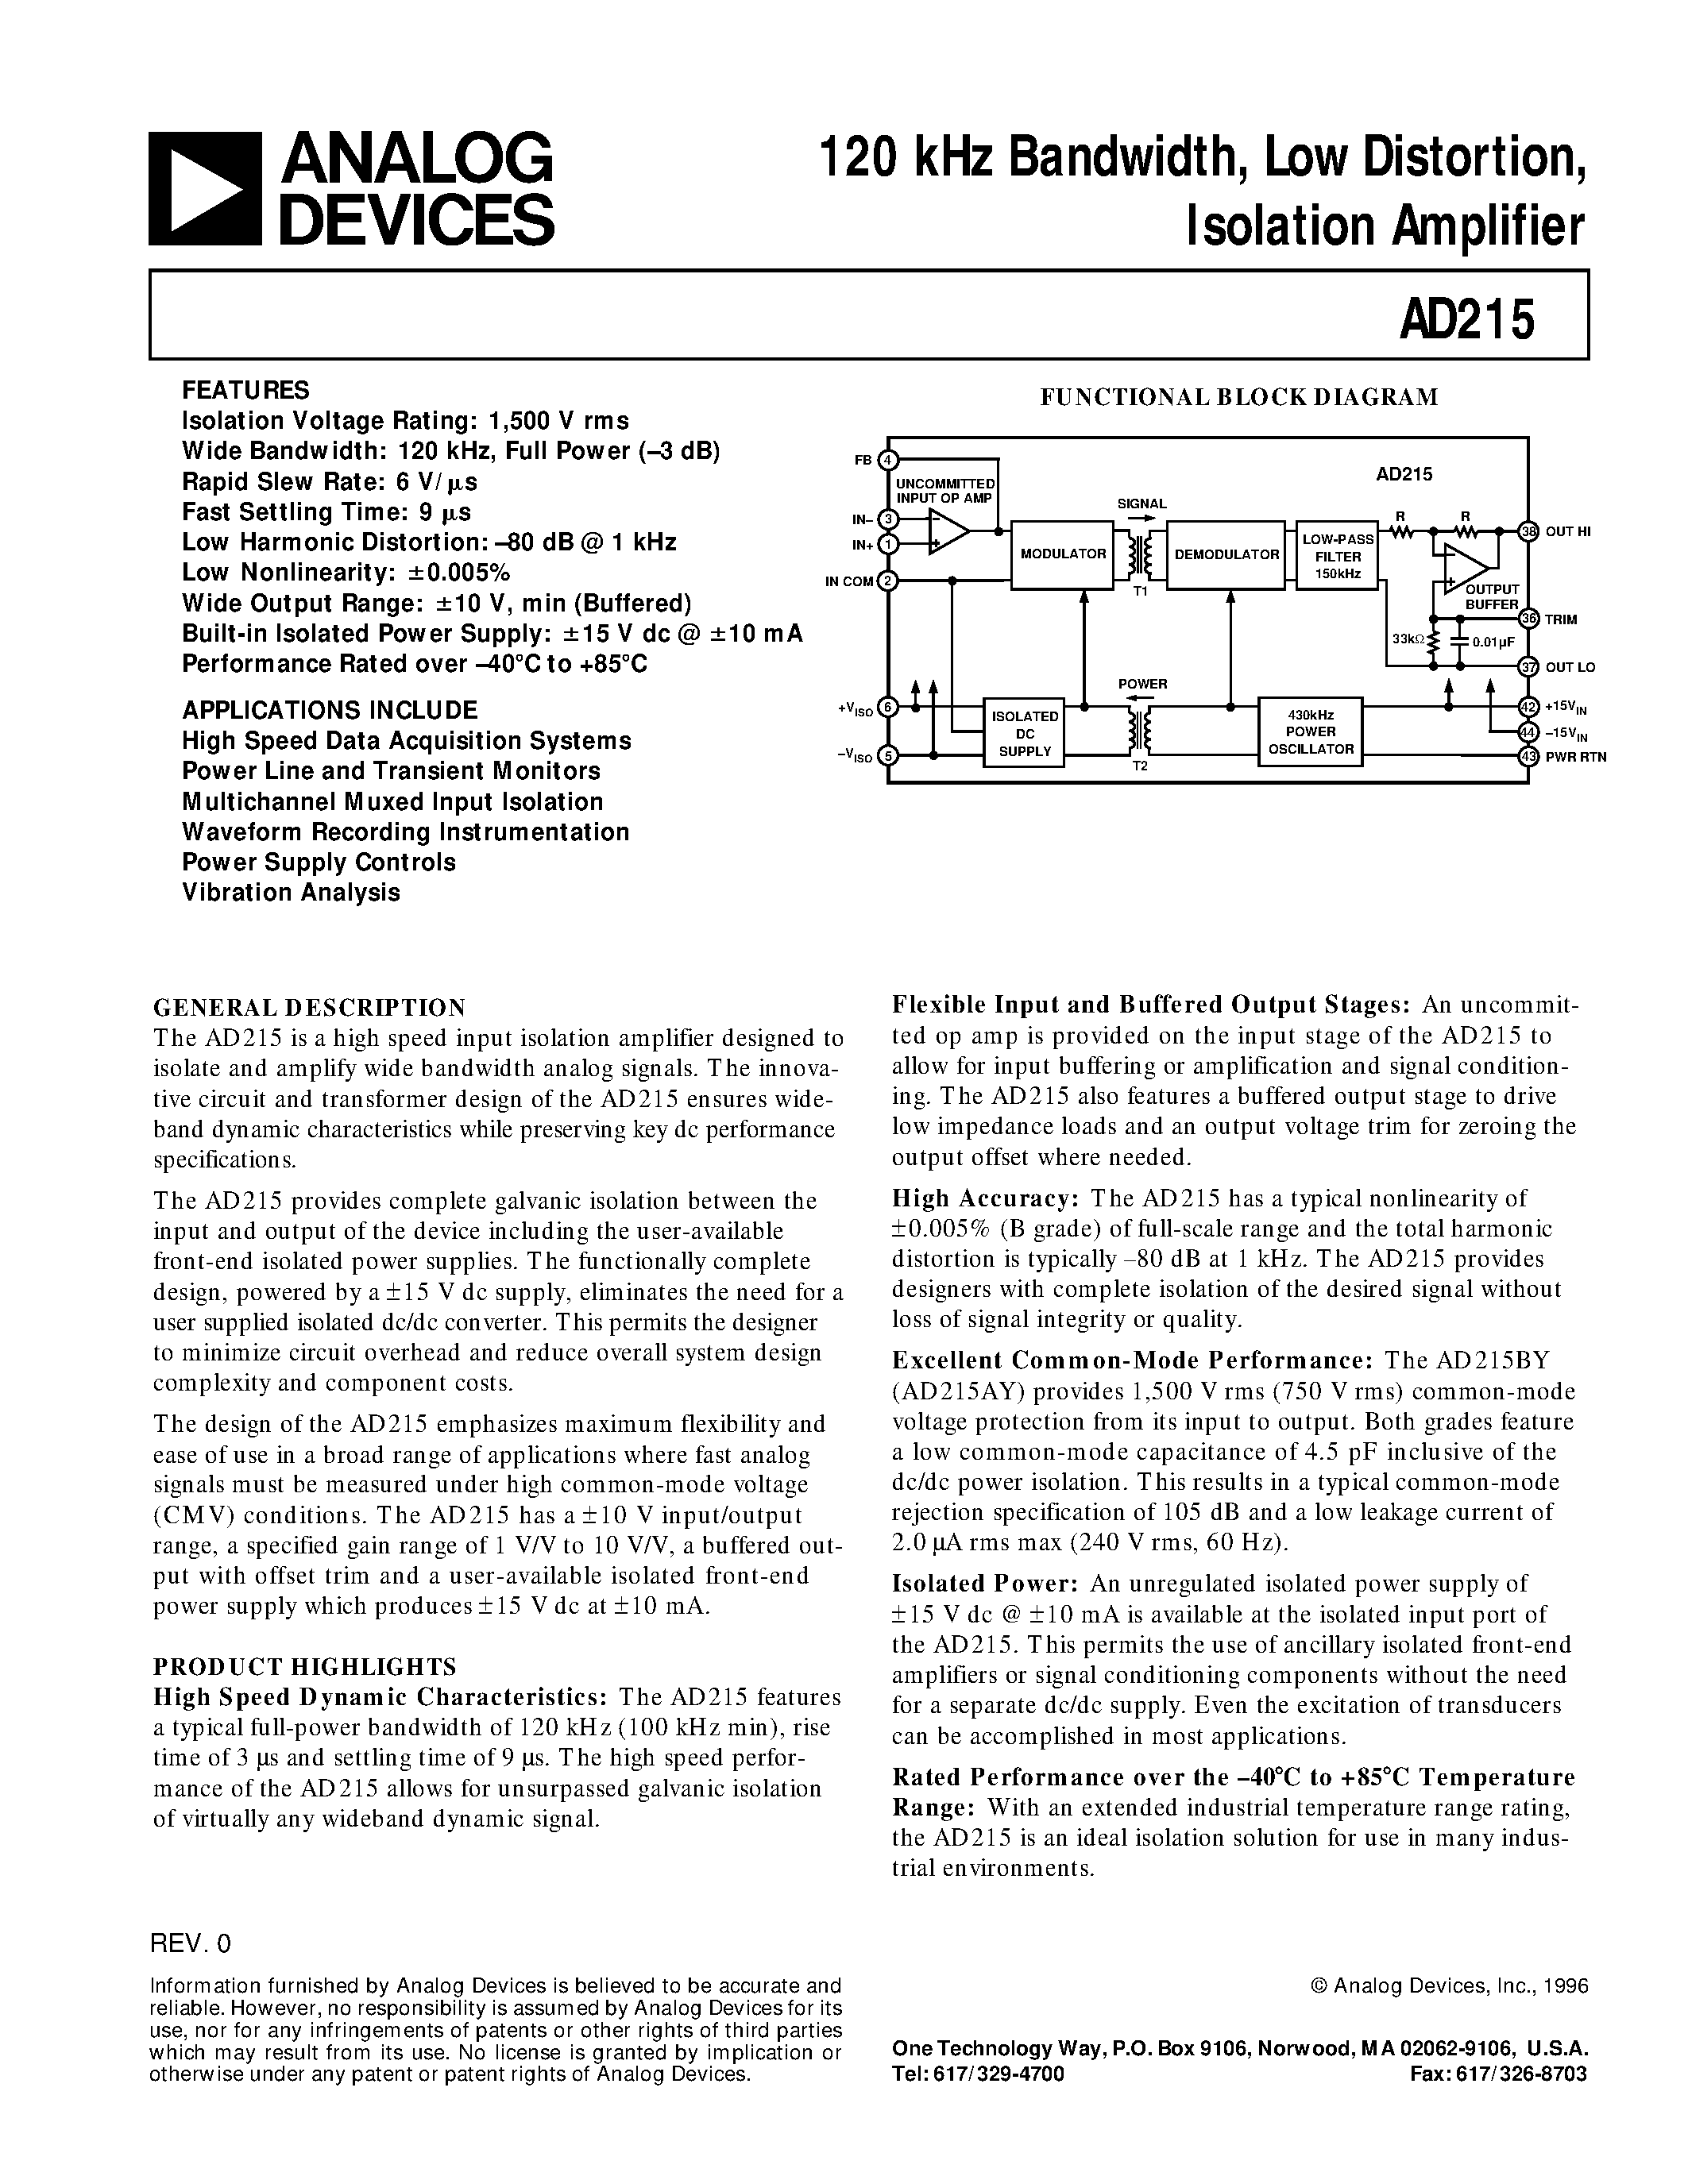 Datasheet AD215BY - 120 kHz Bandwidth/ Low Distortion/ Isolation Amplifier page 1